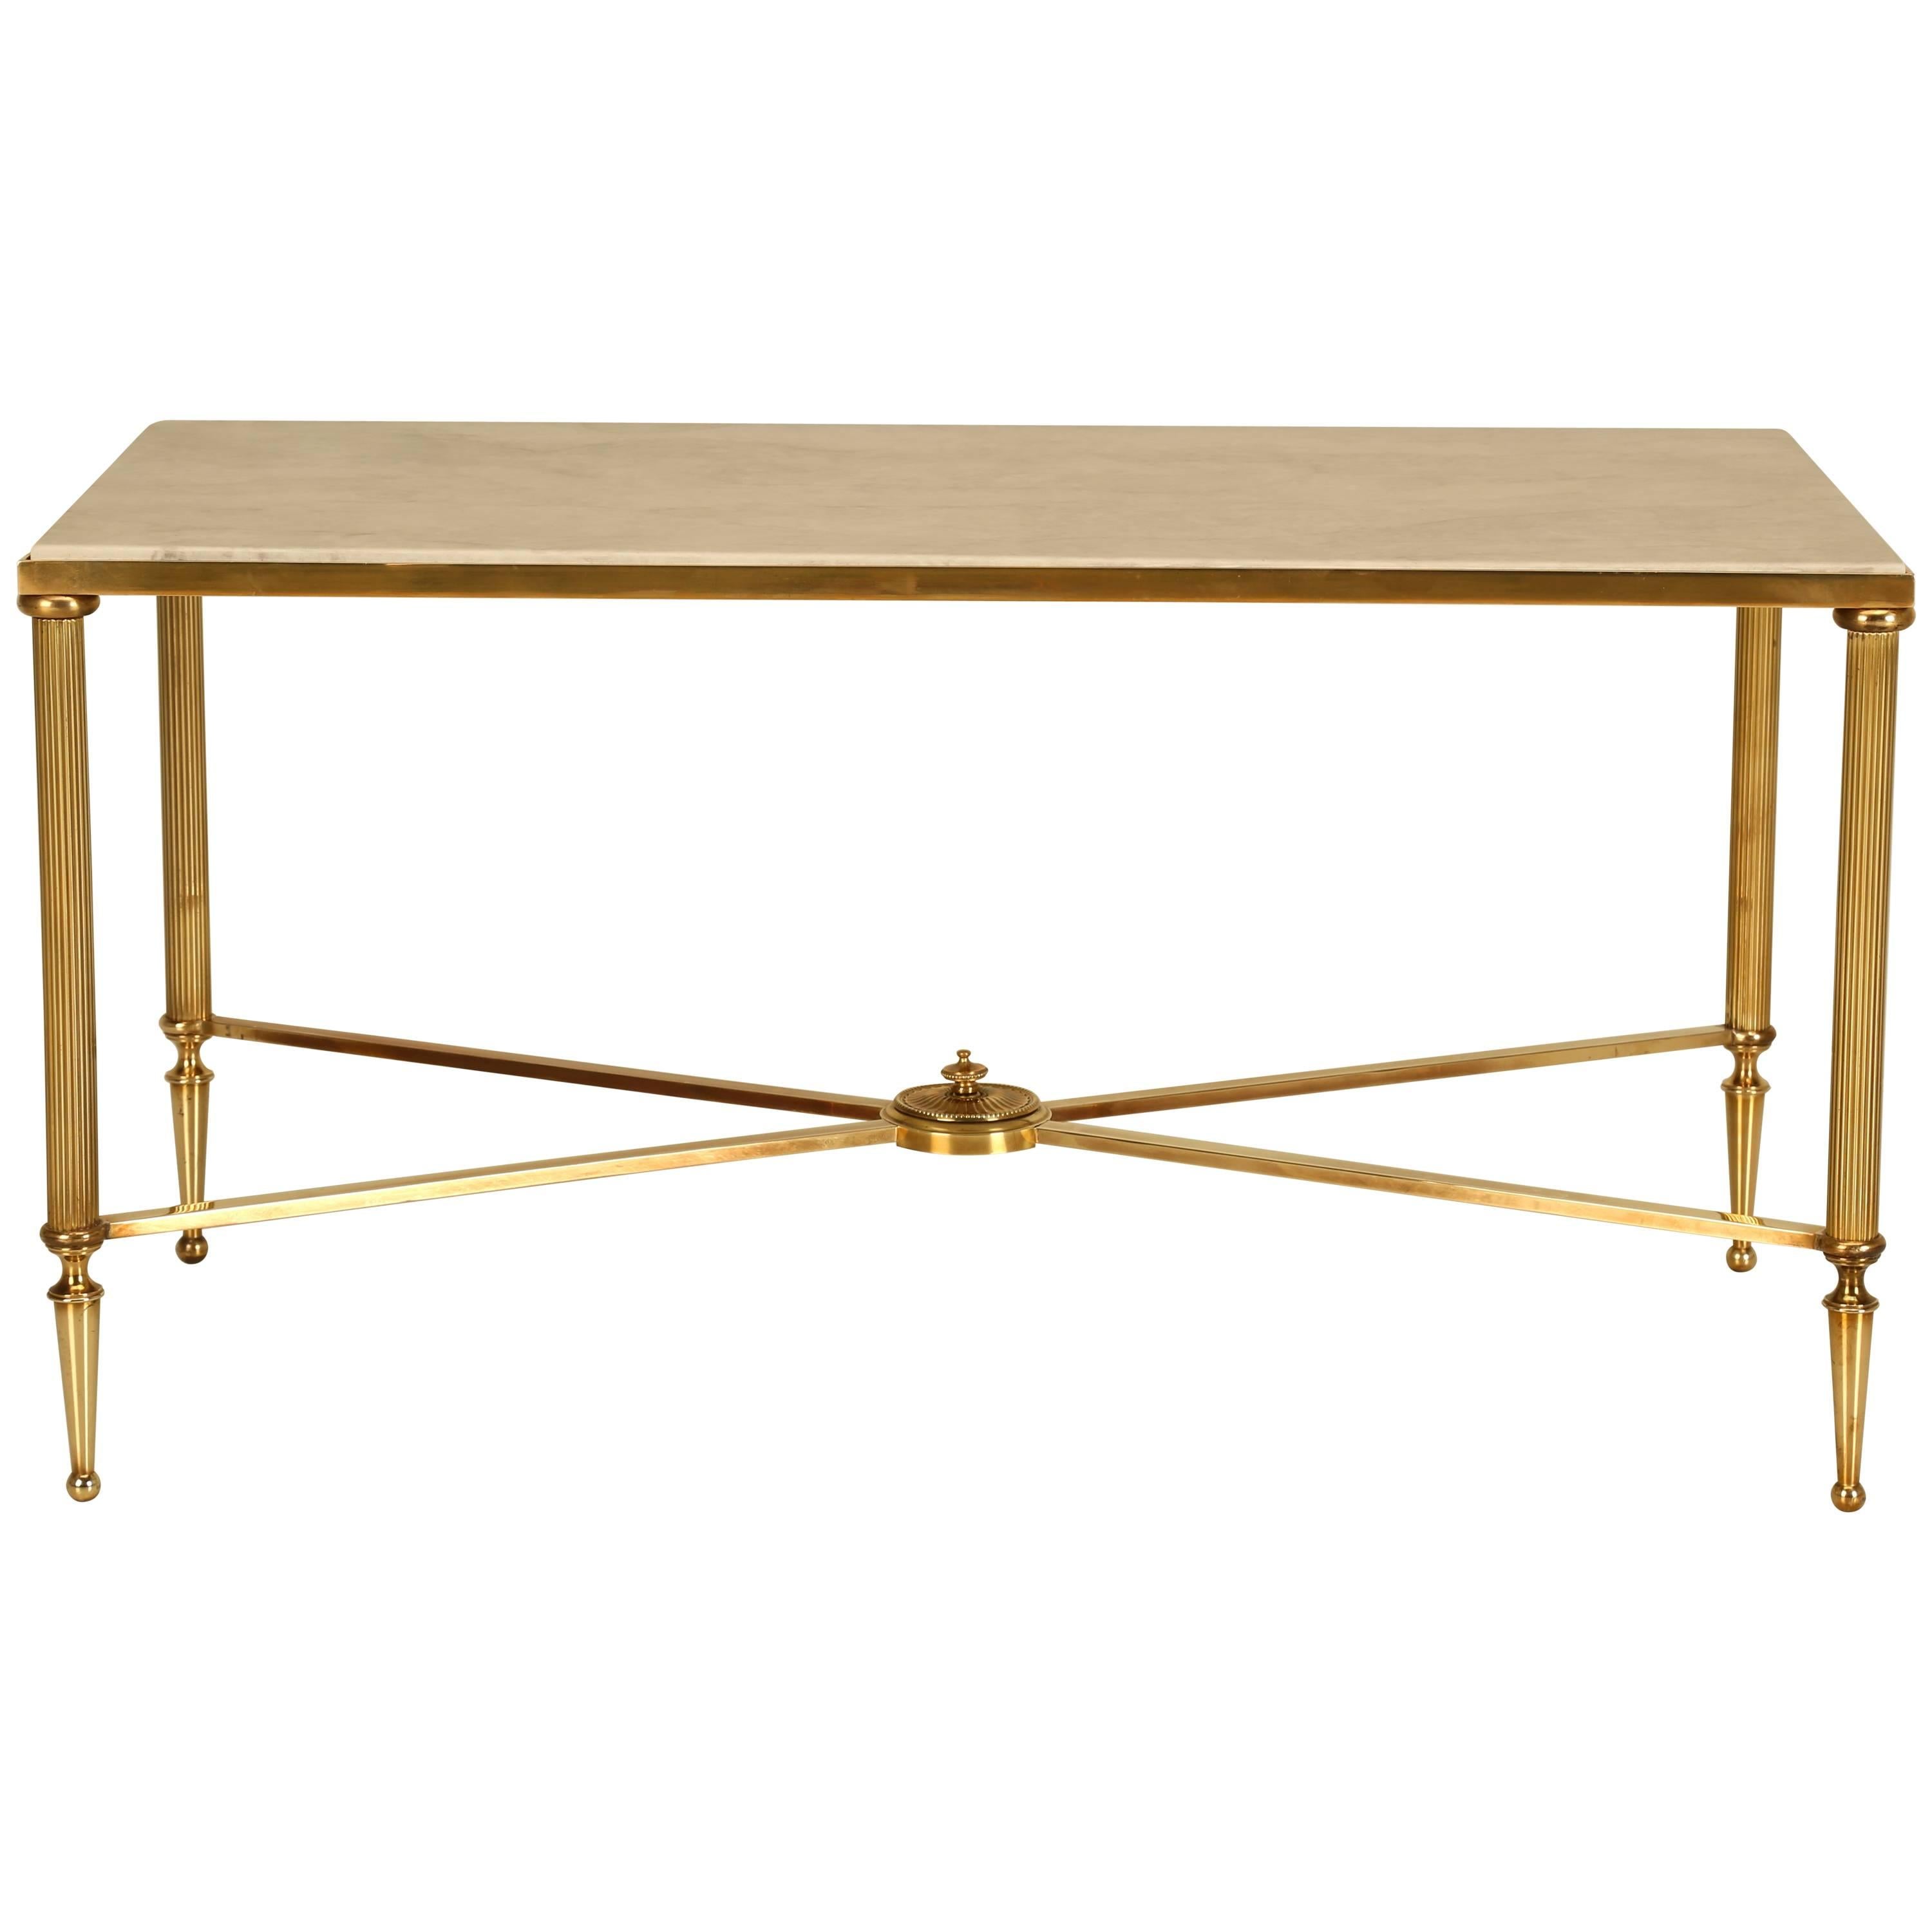 French Mid-Century Modern Coffee or Cocktail Table in Polished Solid Brass